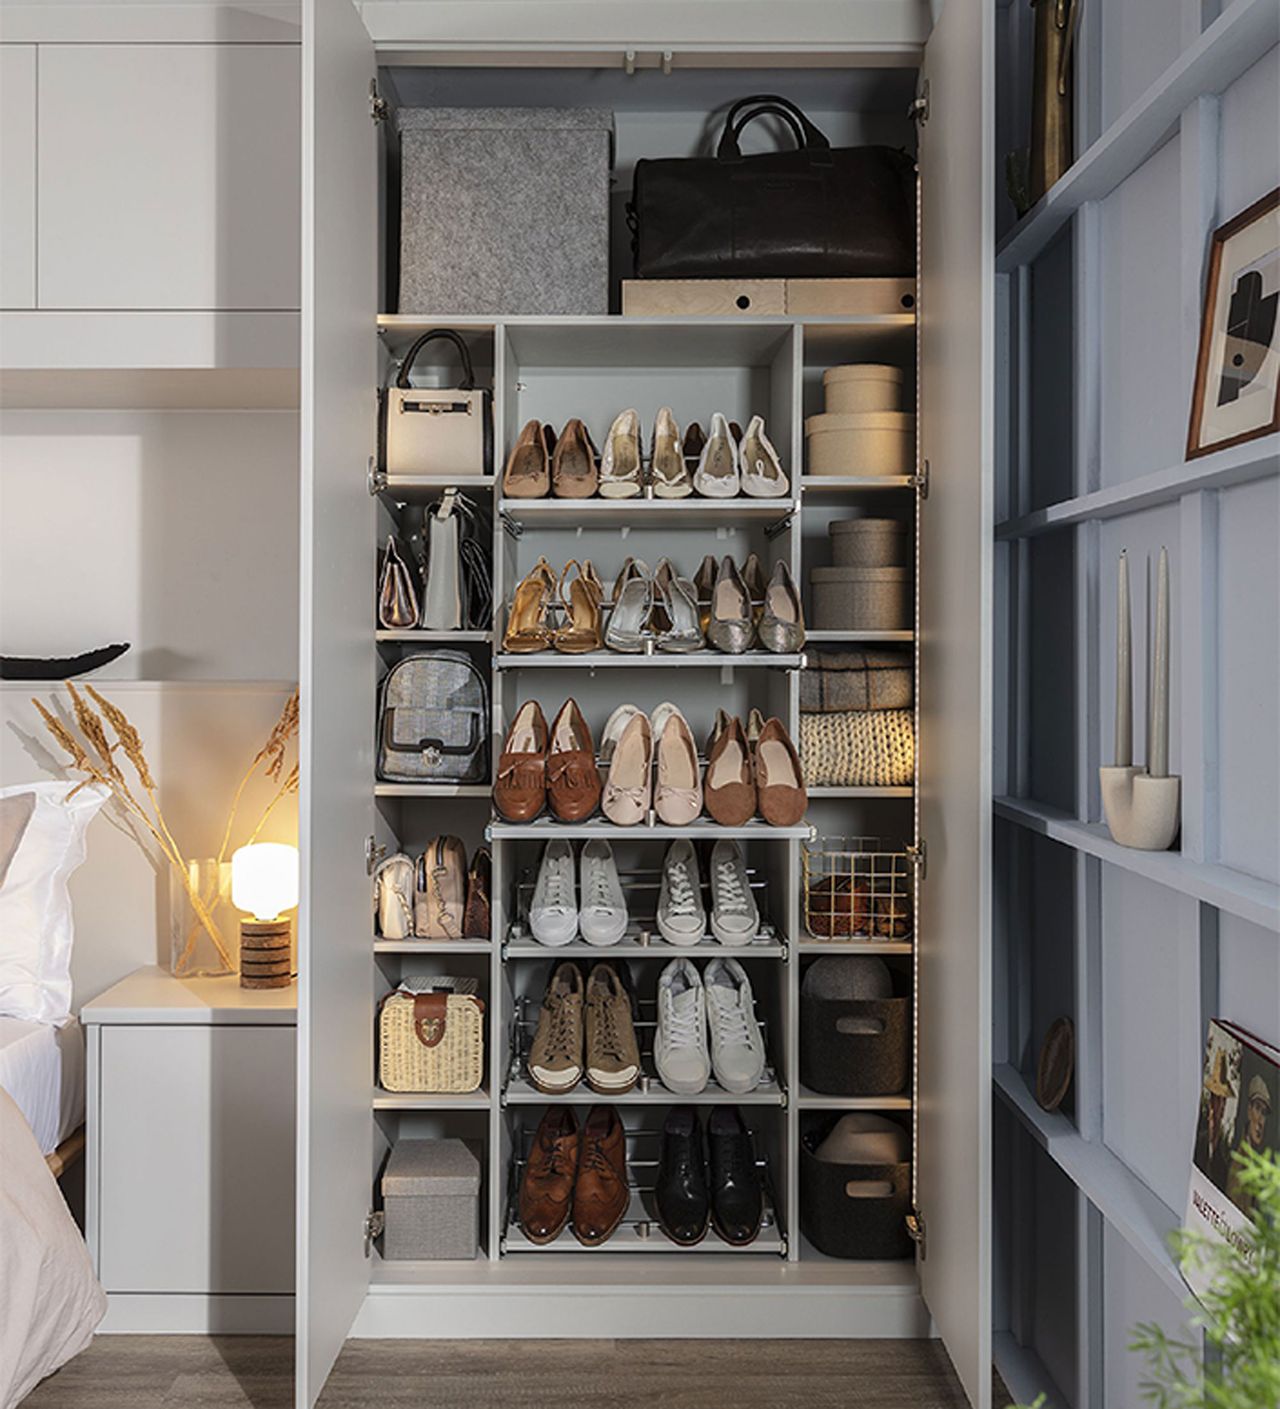 Bedroom shoe storage ideas - calm footwear chaos with these solutions ...